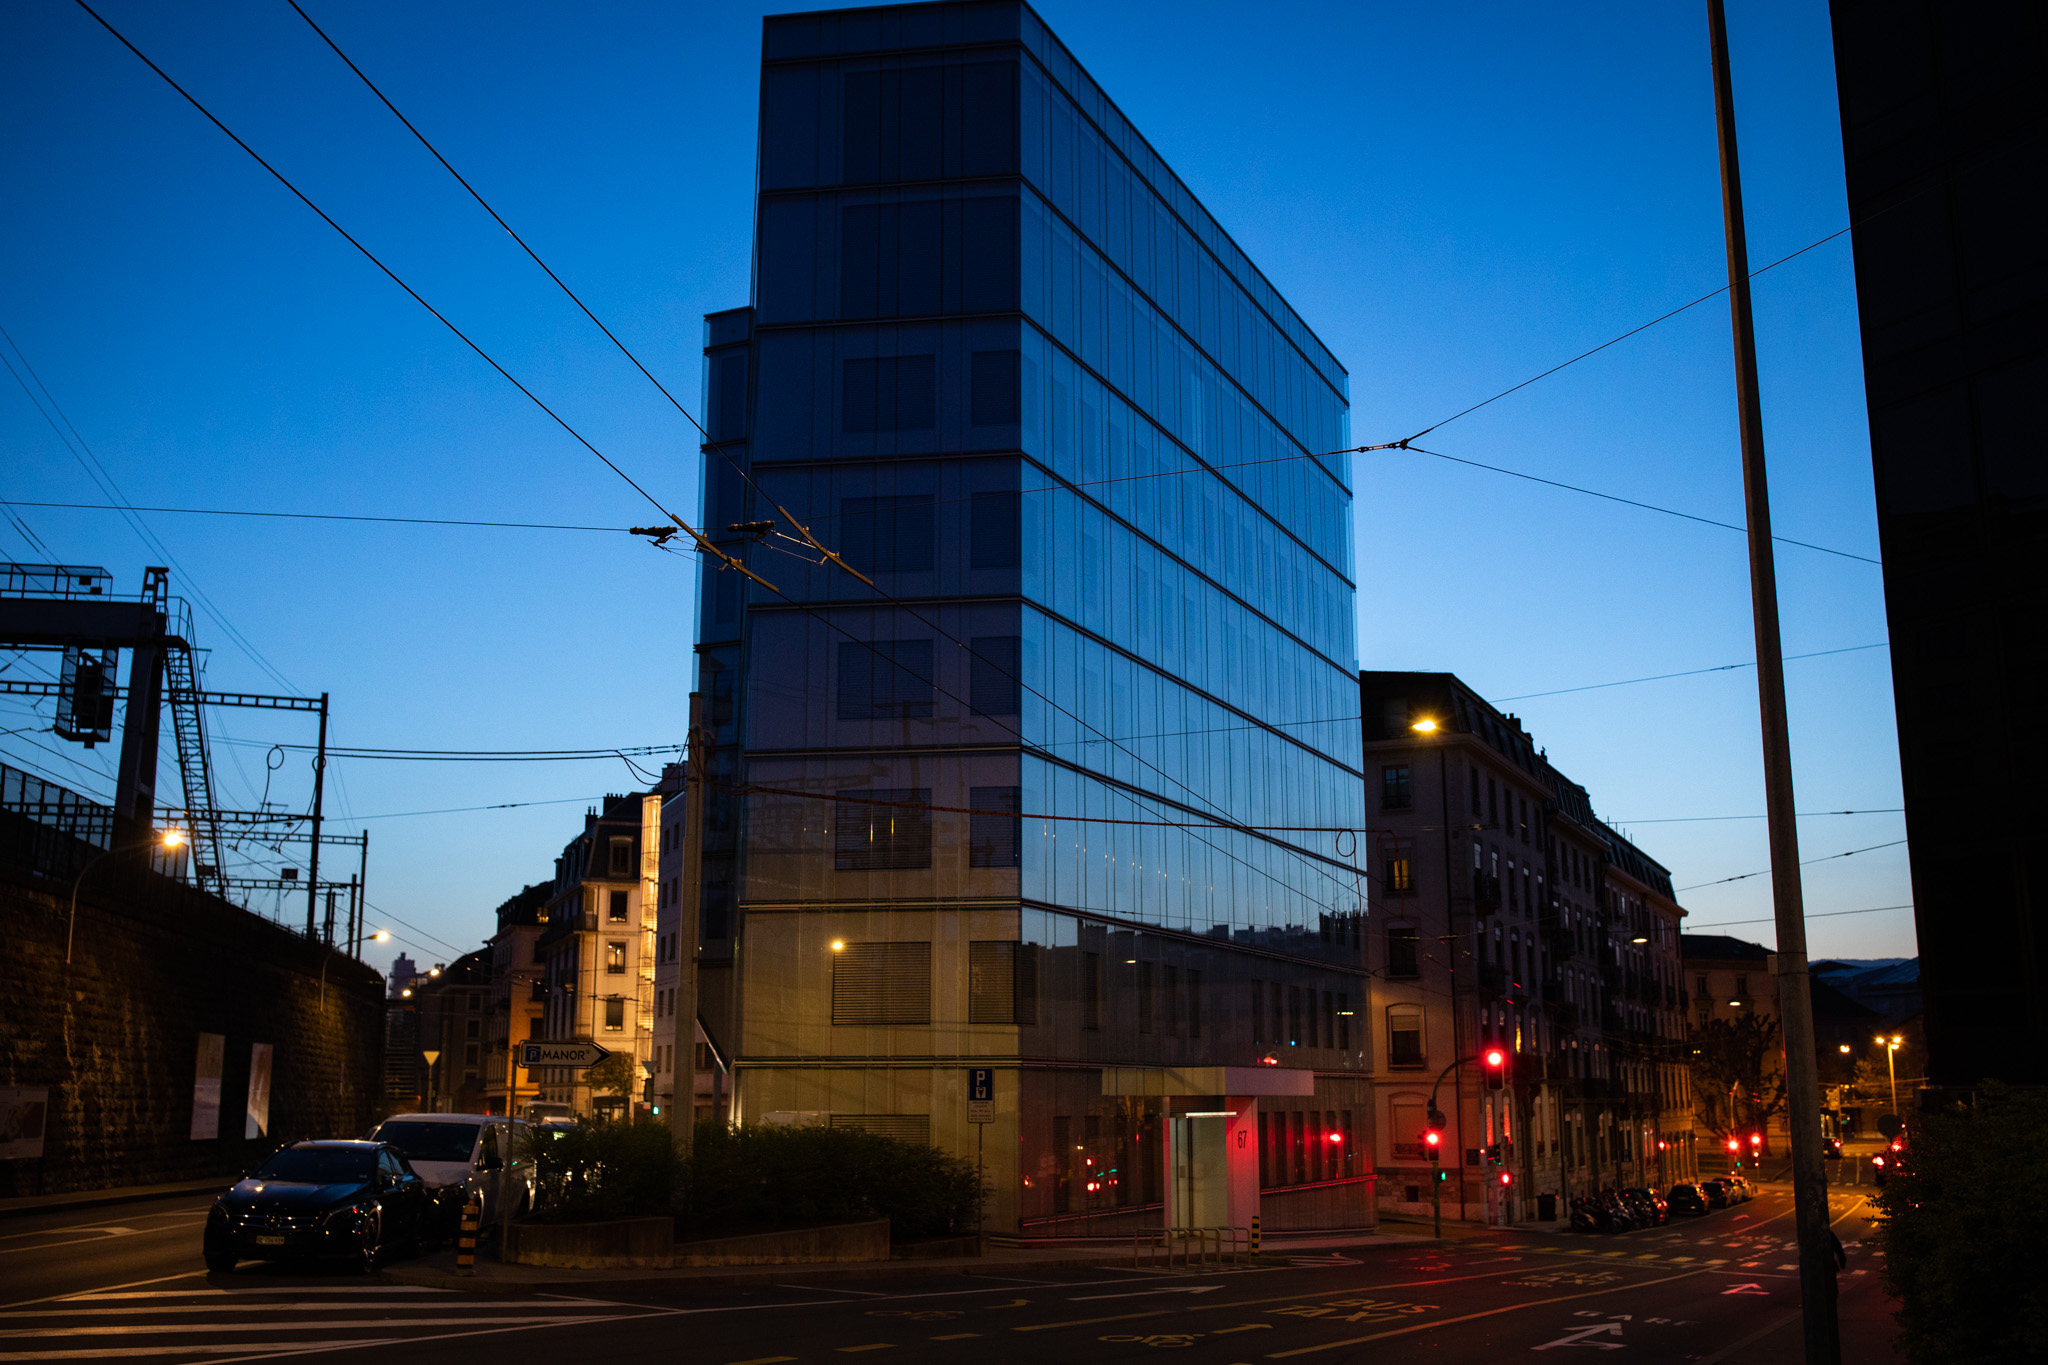 General 2048x1365 photography outdoors urban city building road car office street light twilight